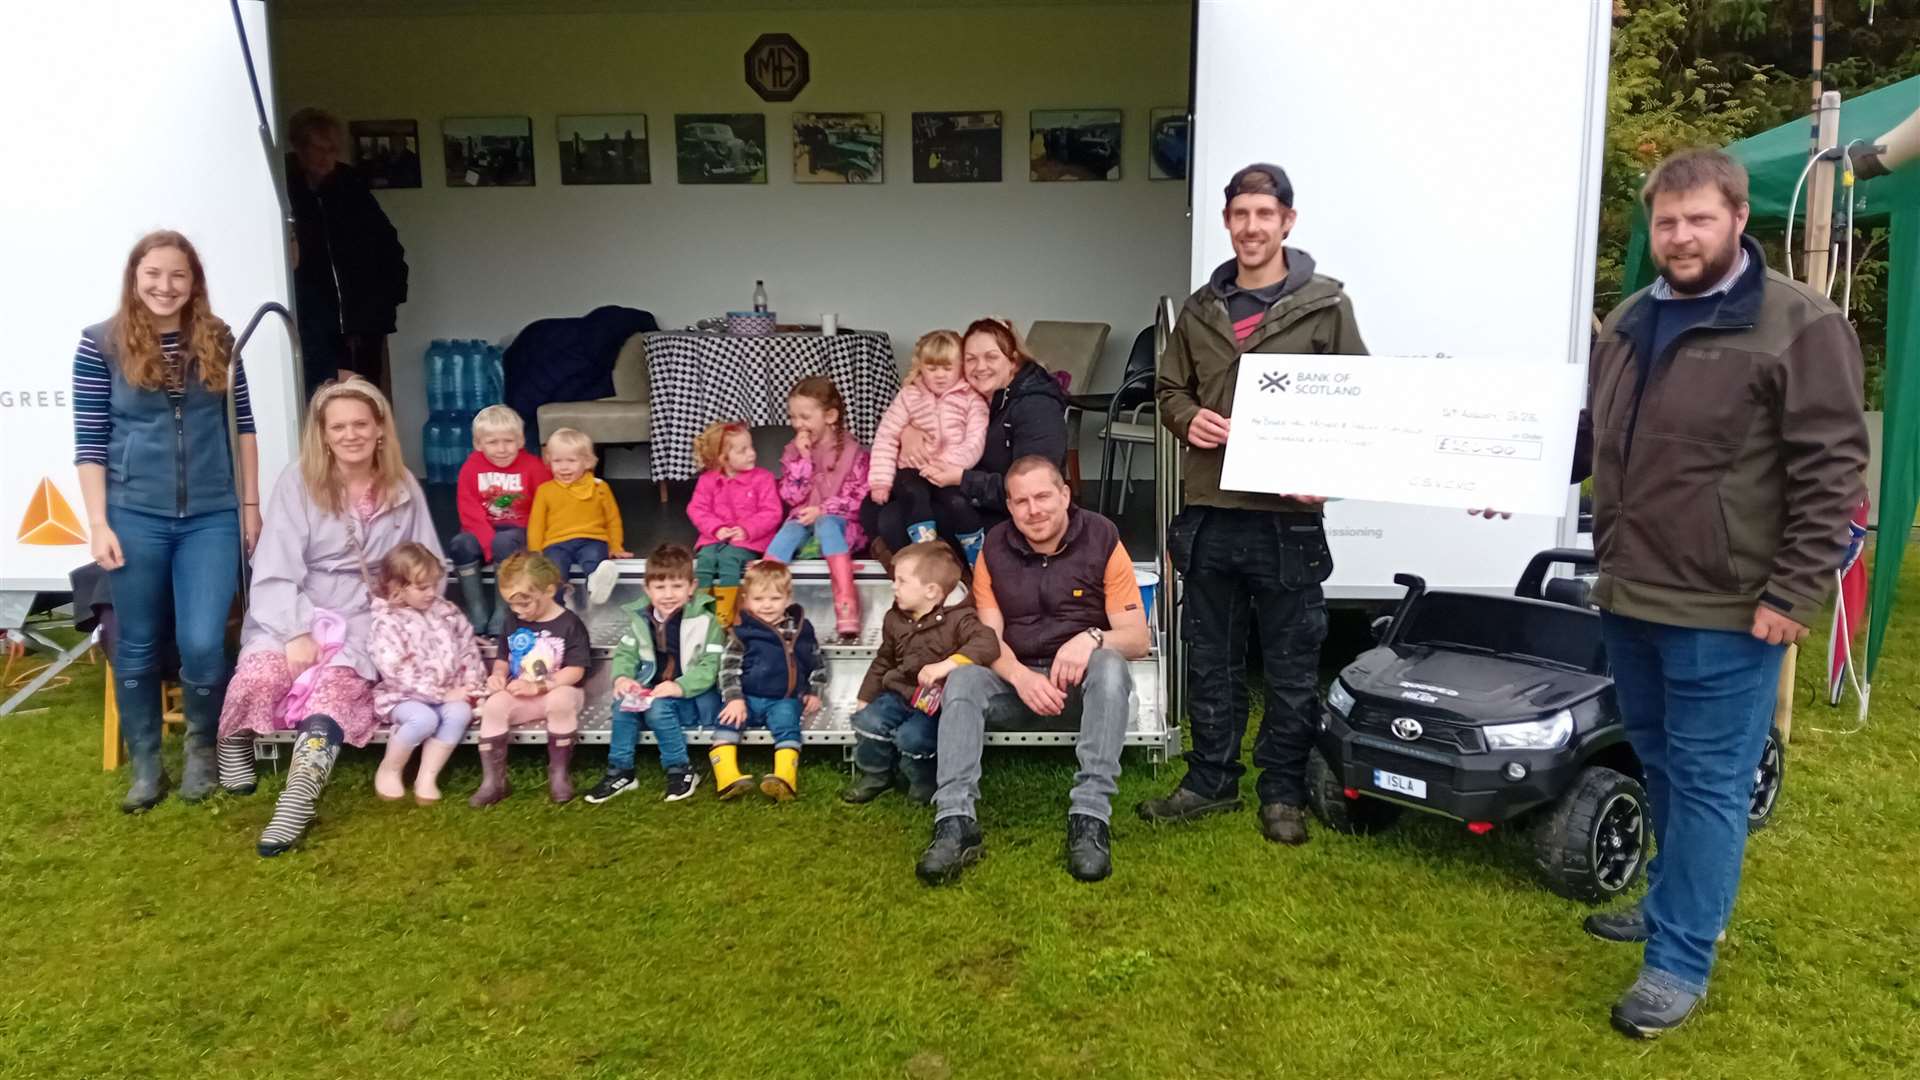 James Green vice chairman of the Caithness and Sutherland Vintage and Classic Vehicle Club presents a cheque for £250 to Fergus Silverwood, to be shared by the young Bower Bumble Bees and the Bower Busy Bees with several club youngsters looking on. Picture: Willie Mackay